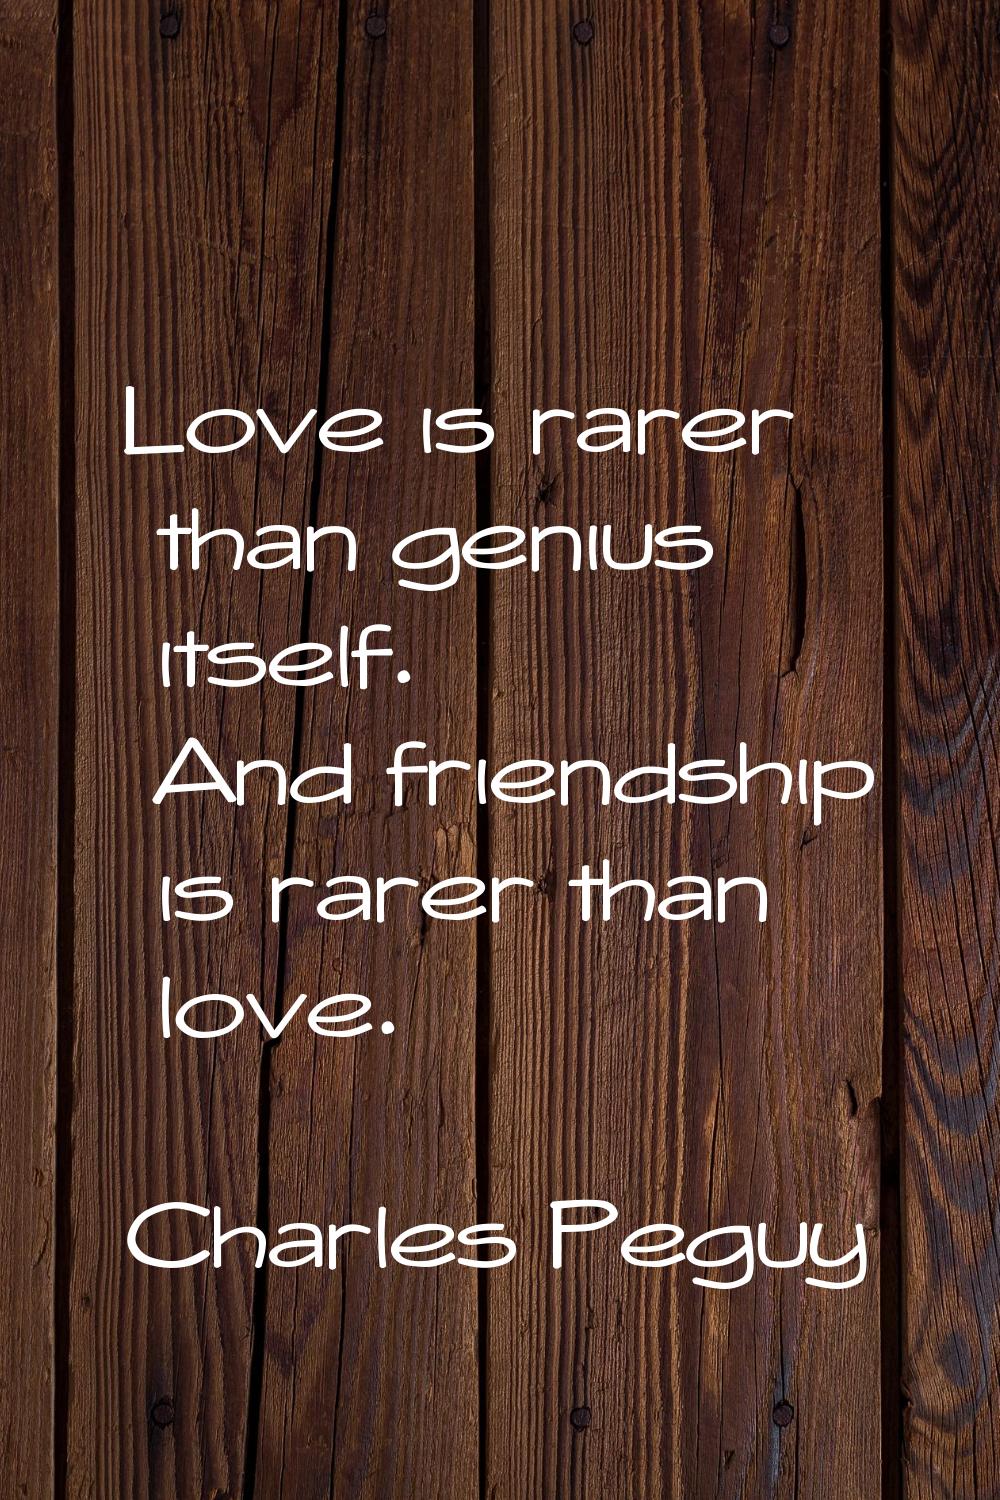 Love is rarer than genius itself. And friendship is rarer than love.